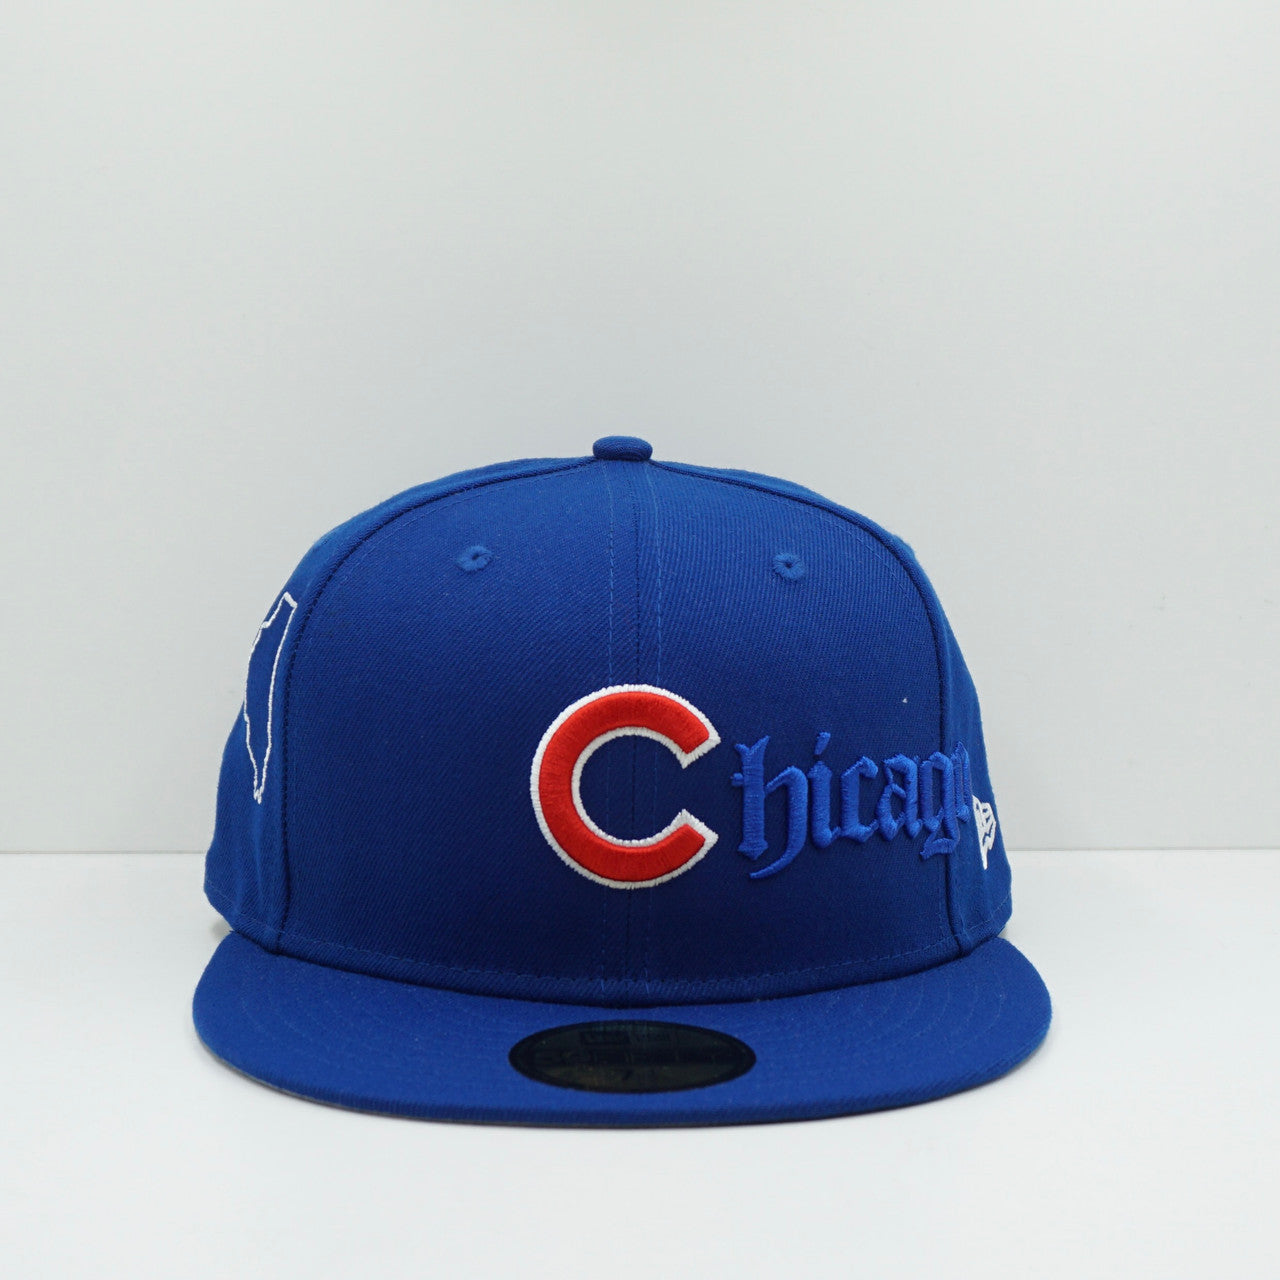 New Era Chicago Cubs Script Blue/Red Fitted Cap